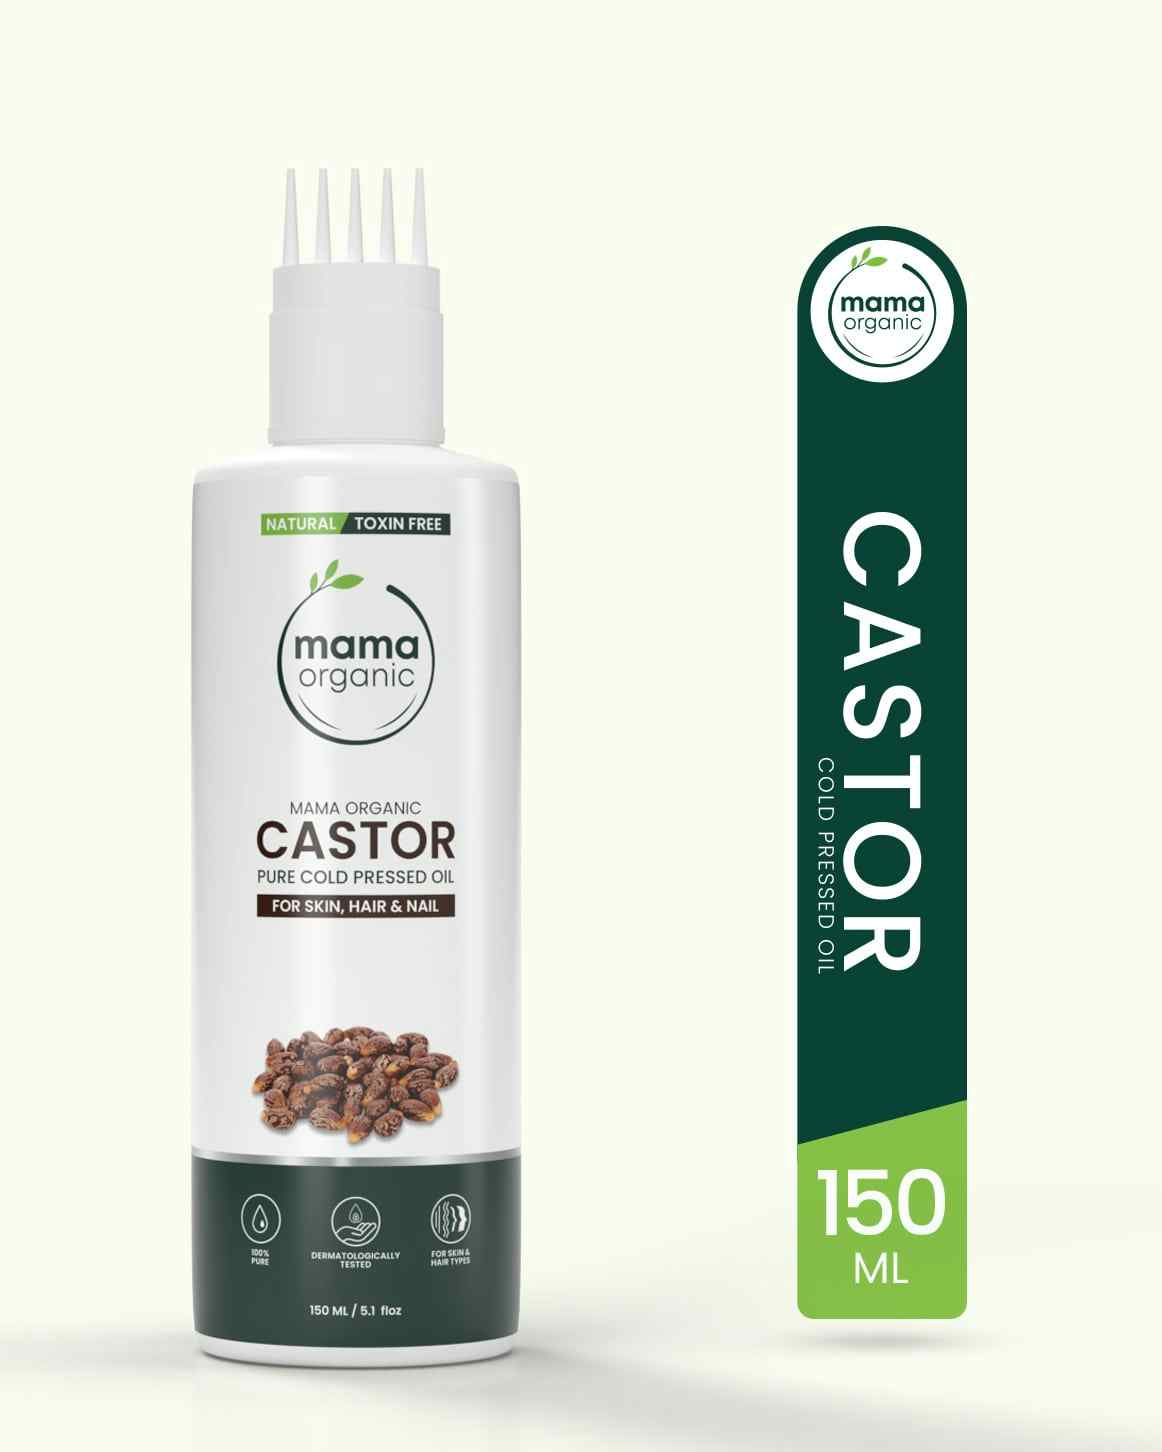 Mama Organic Castor Oil For Hair Growth | For Skin | For Women & Men | Natural & Toxin-Free - 150ml